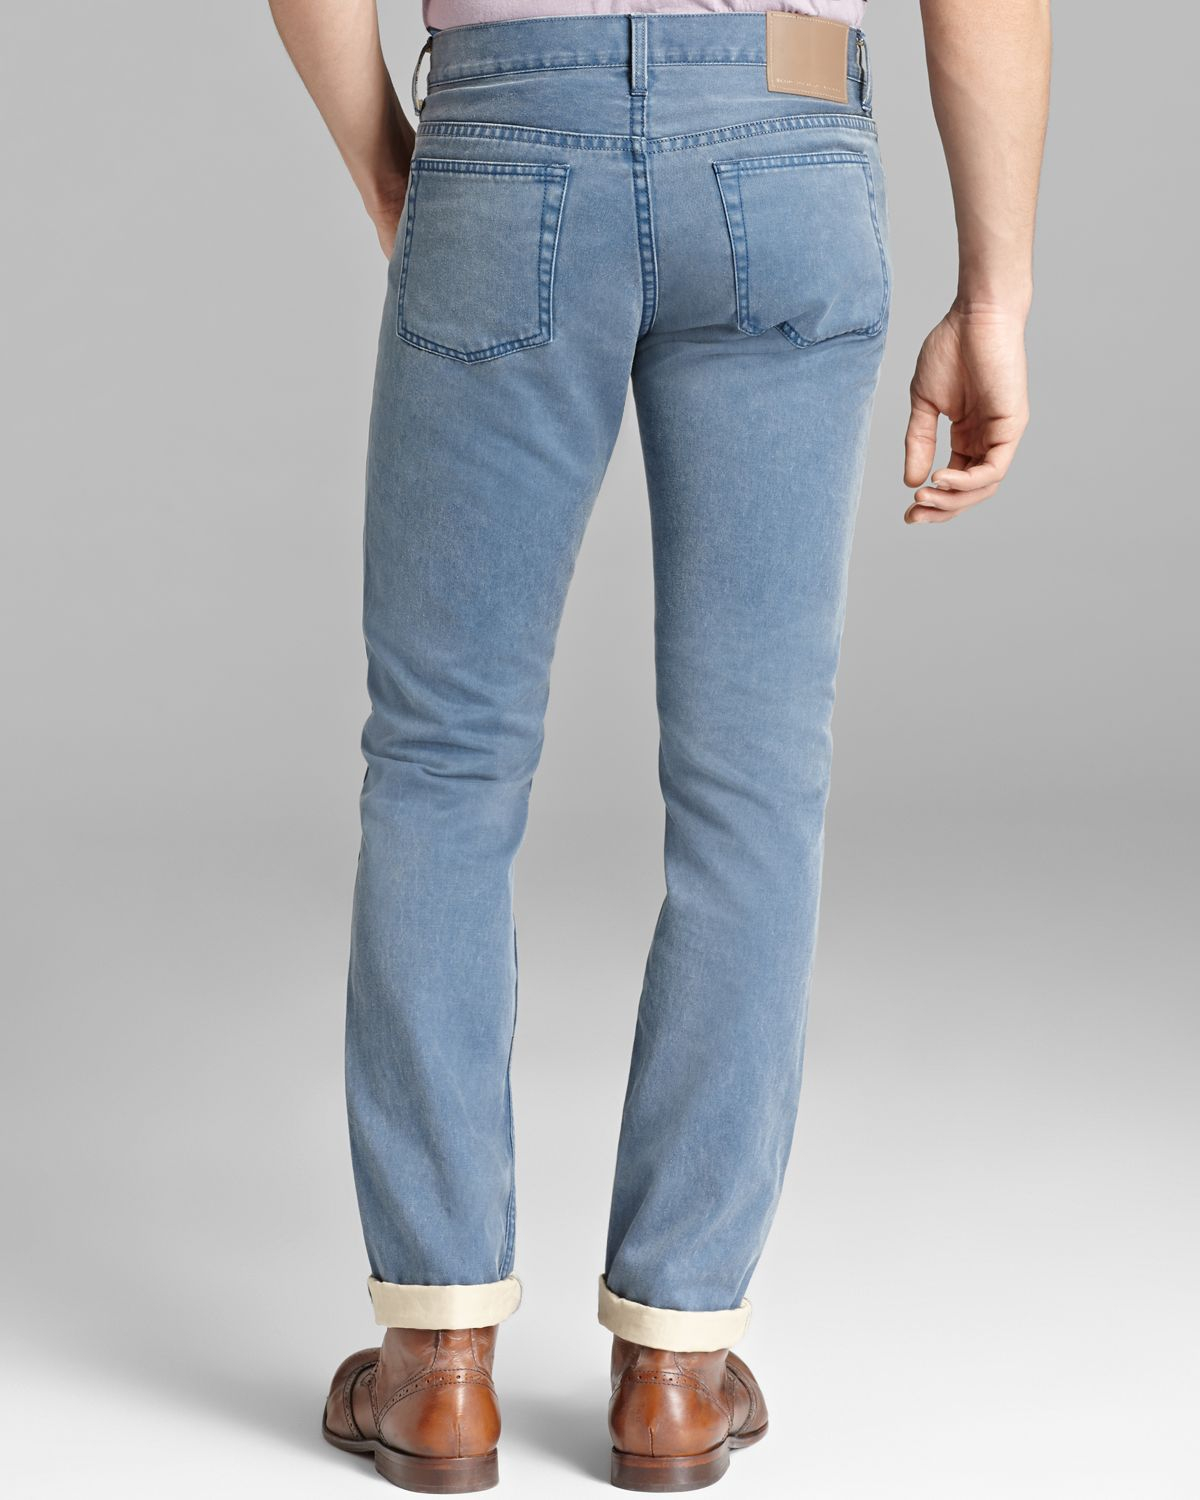 Lyst - Marc by marc jacobs Jeans Painted Denim Straight Fit in ...